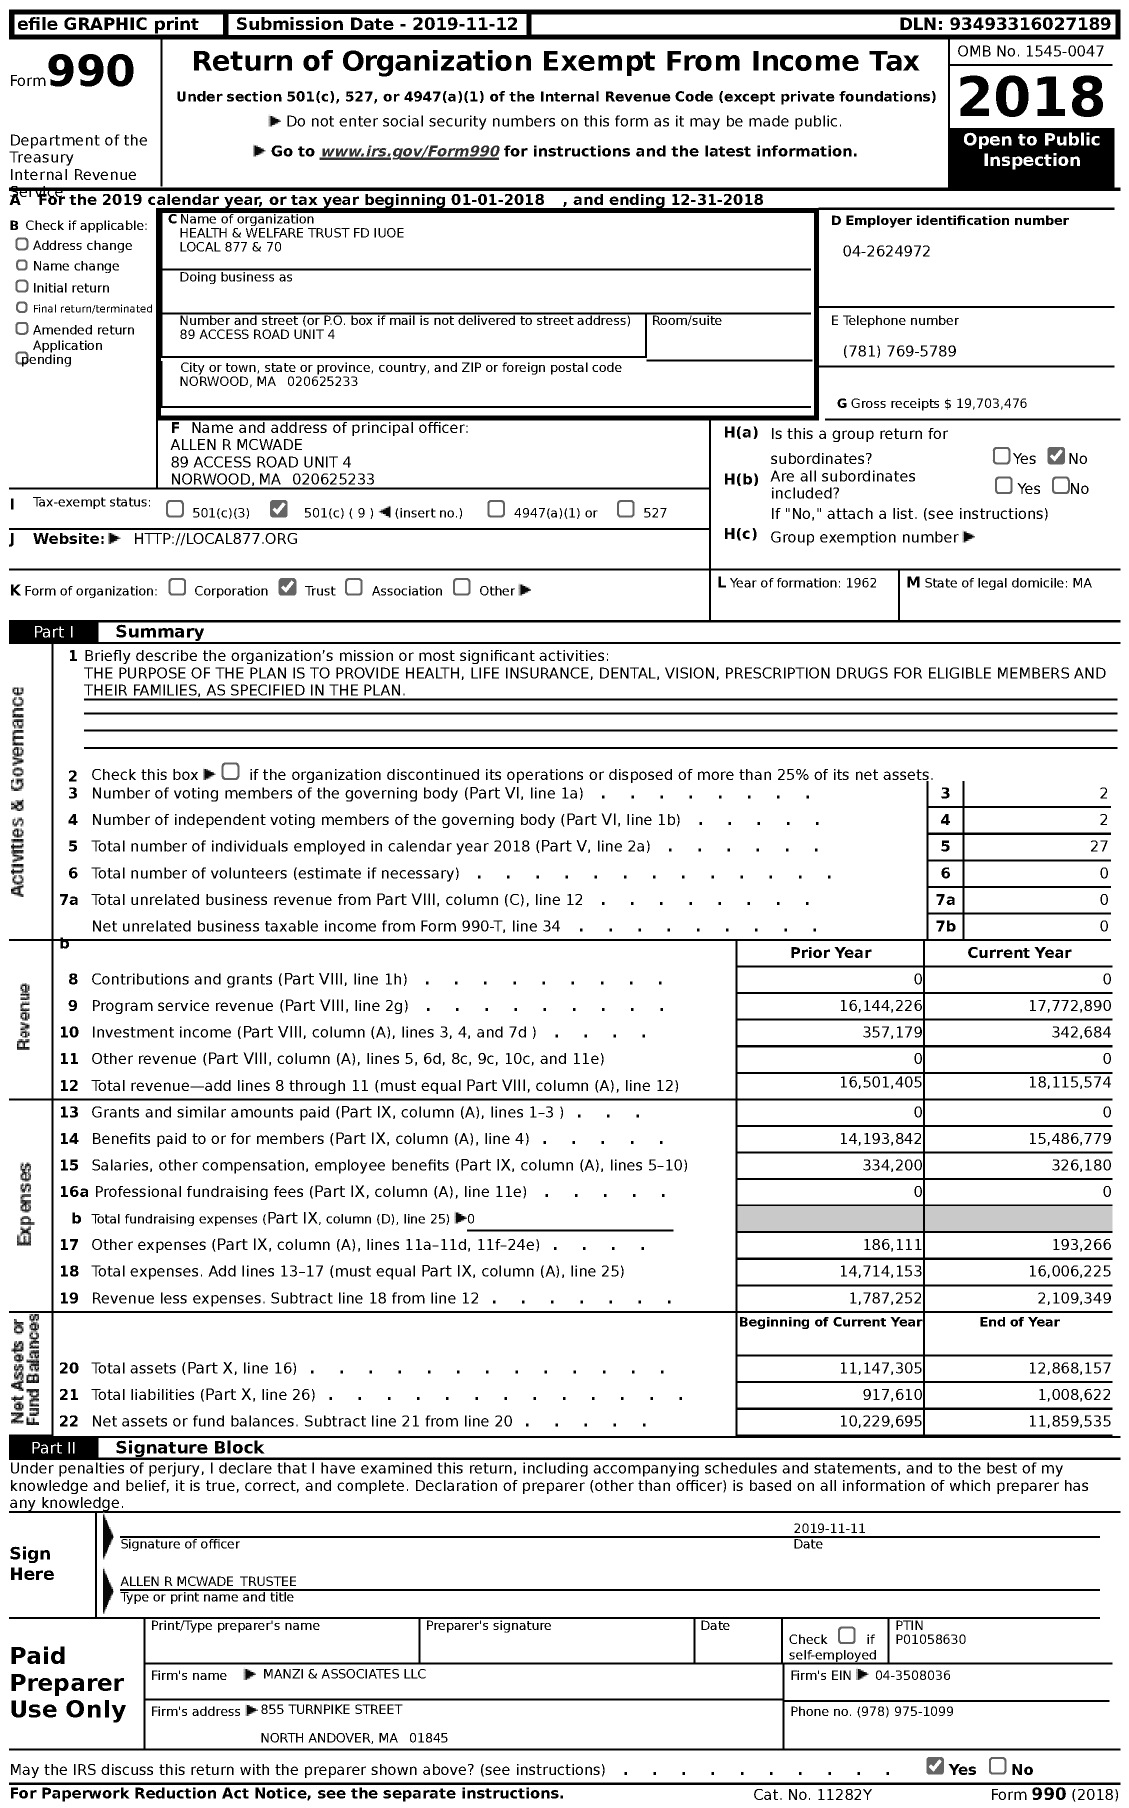 Image of first page of 2018 Form 990 for Health and Welfare Trust Fund Iuoe Local 877 and 70